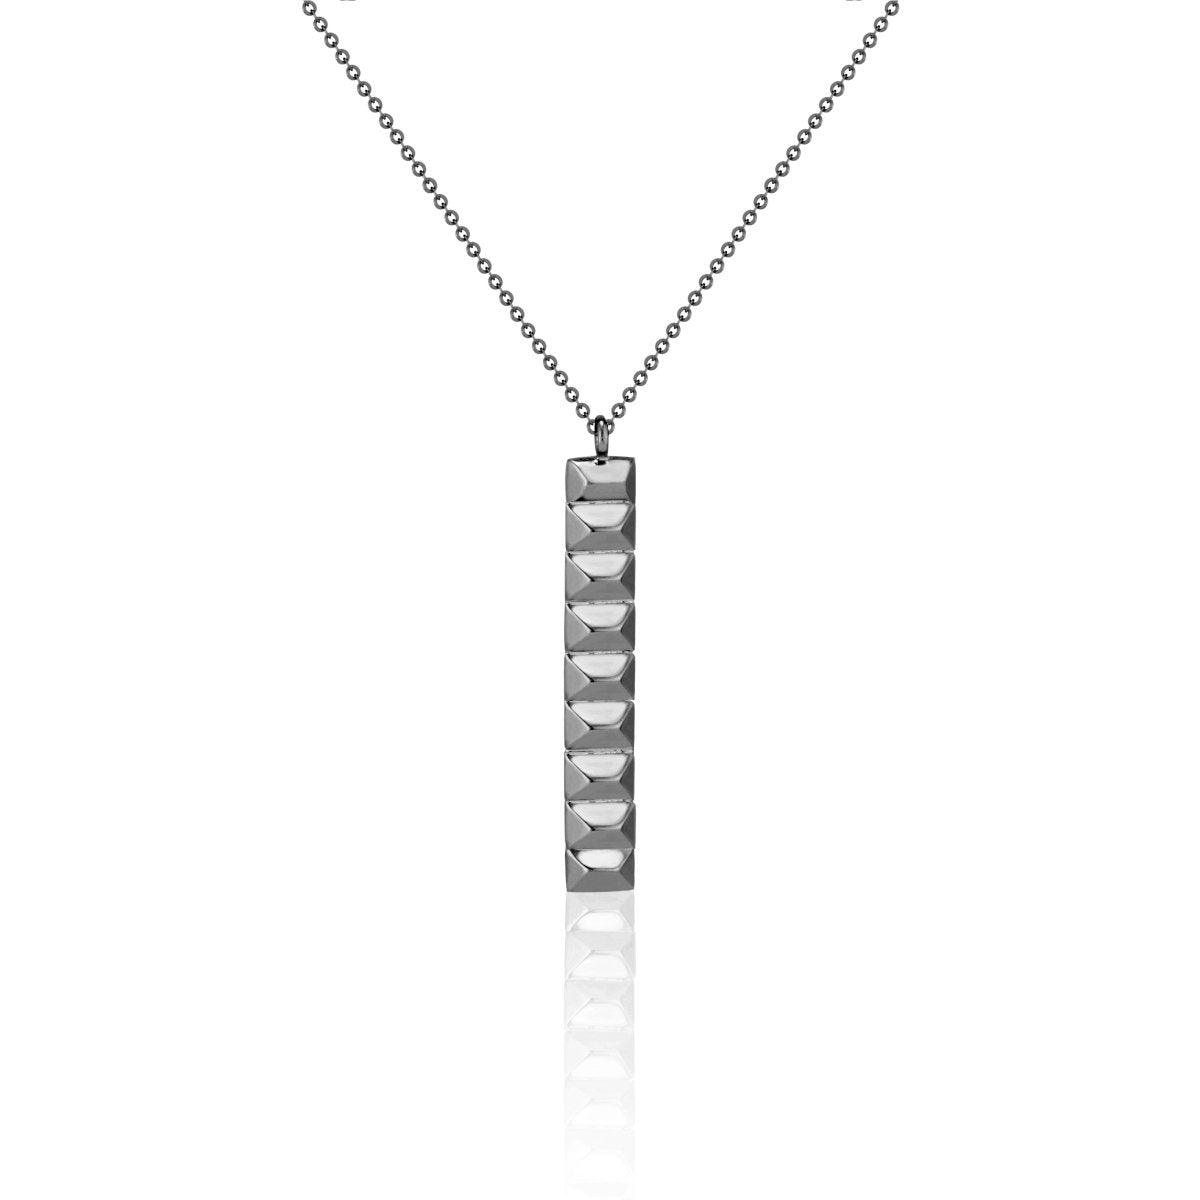 Sparks Fly Vertical Pendant Sterling - Nataly Aponte